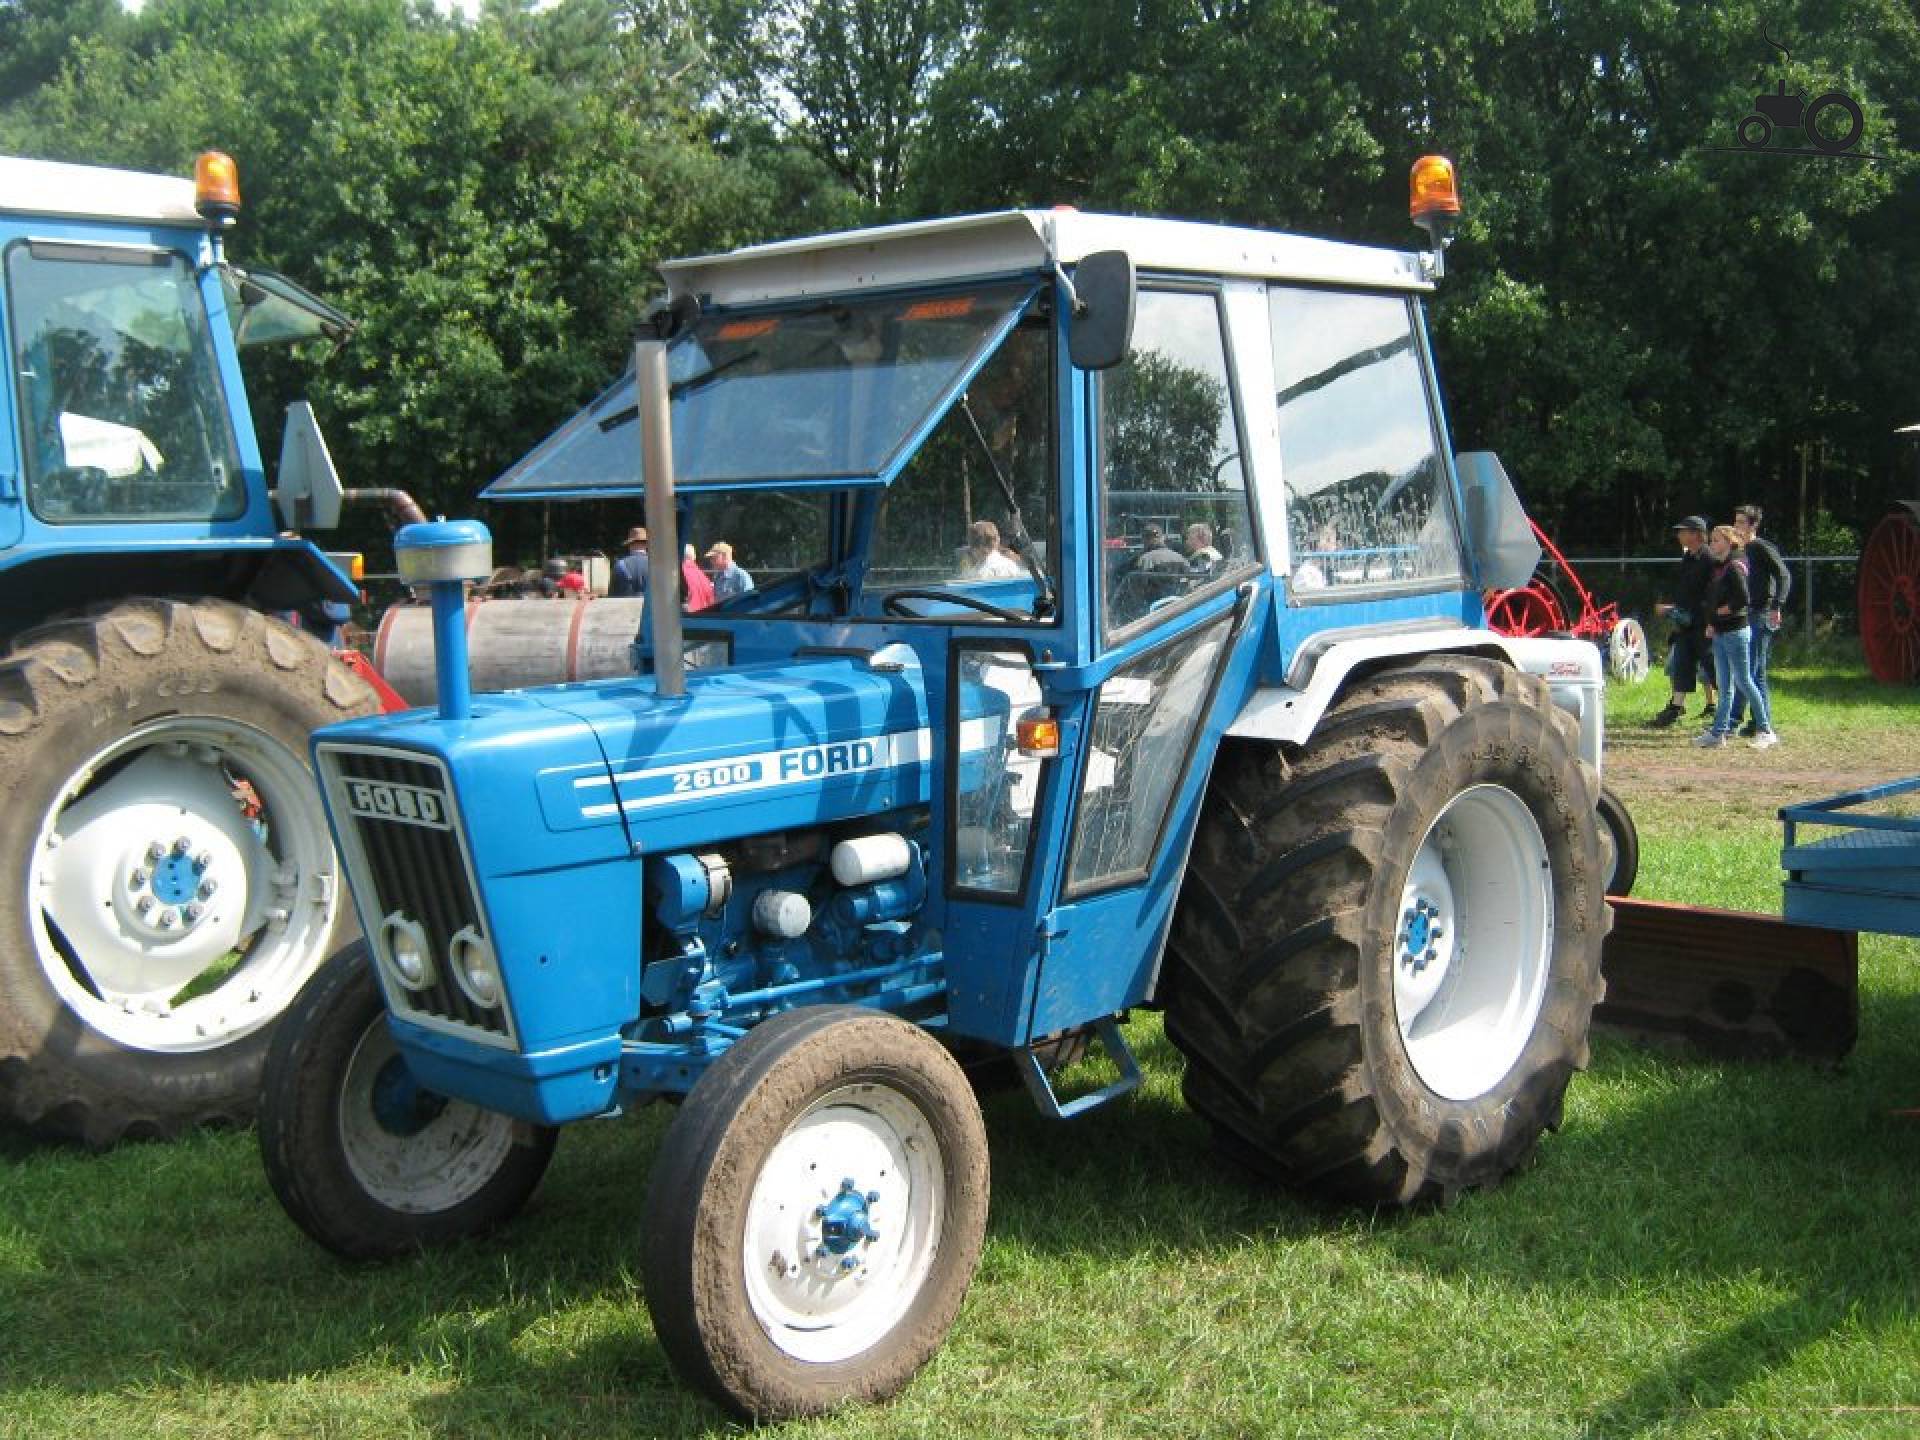 Ford 2600 Tractor Related Keywords & Suggestions - Ford 2600 Tractor ...